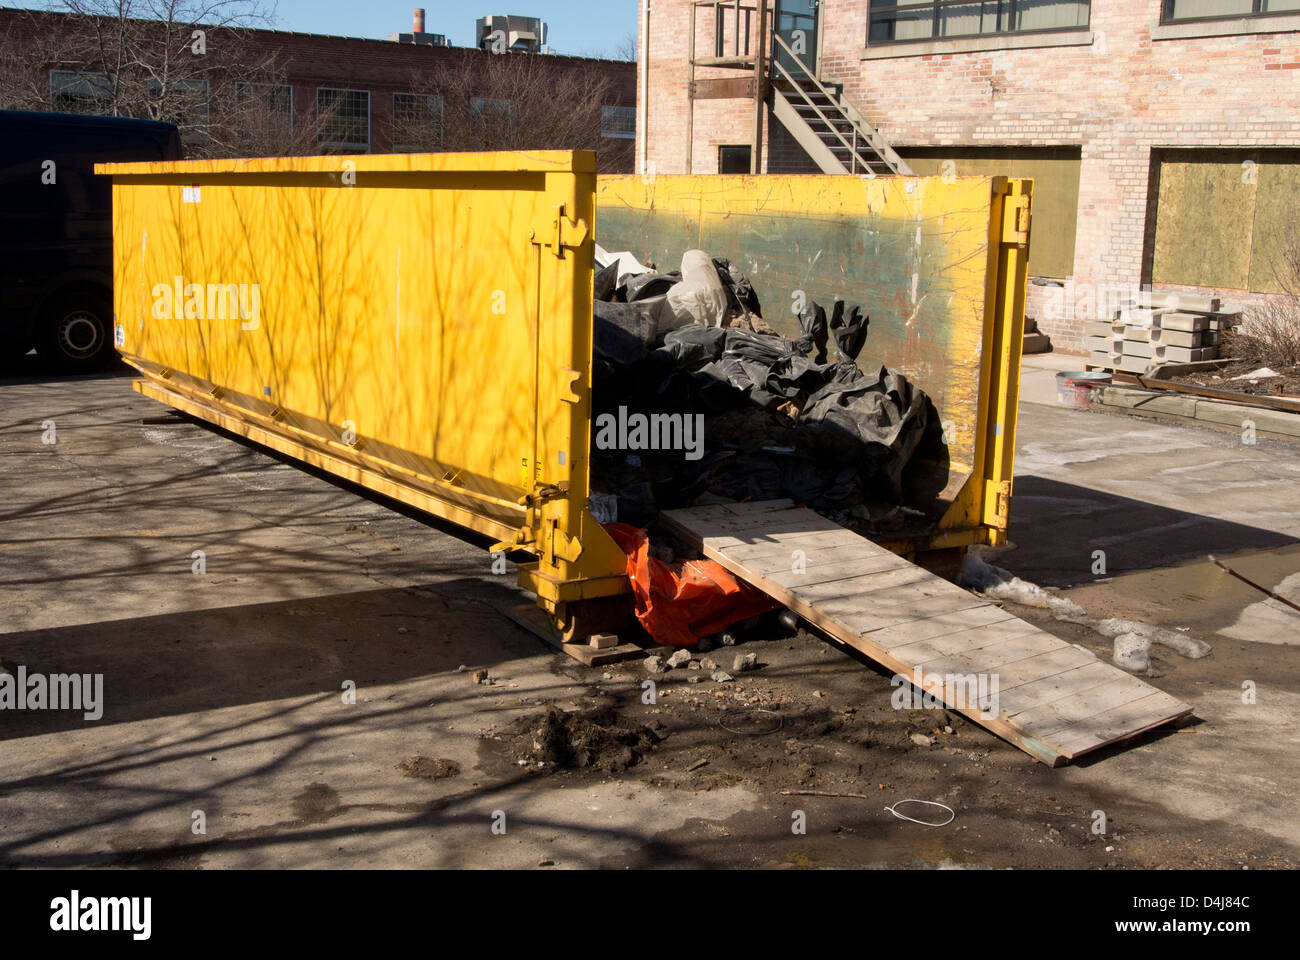 Offenen Müllcontainer. Stockfoto